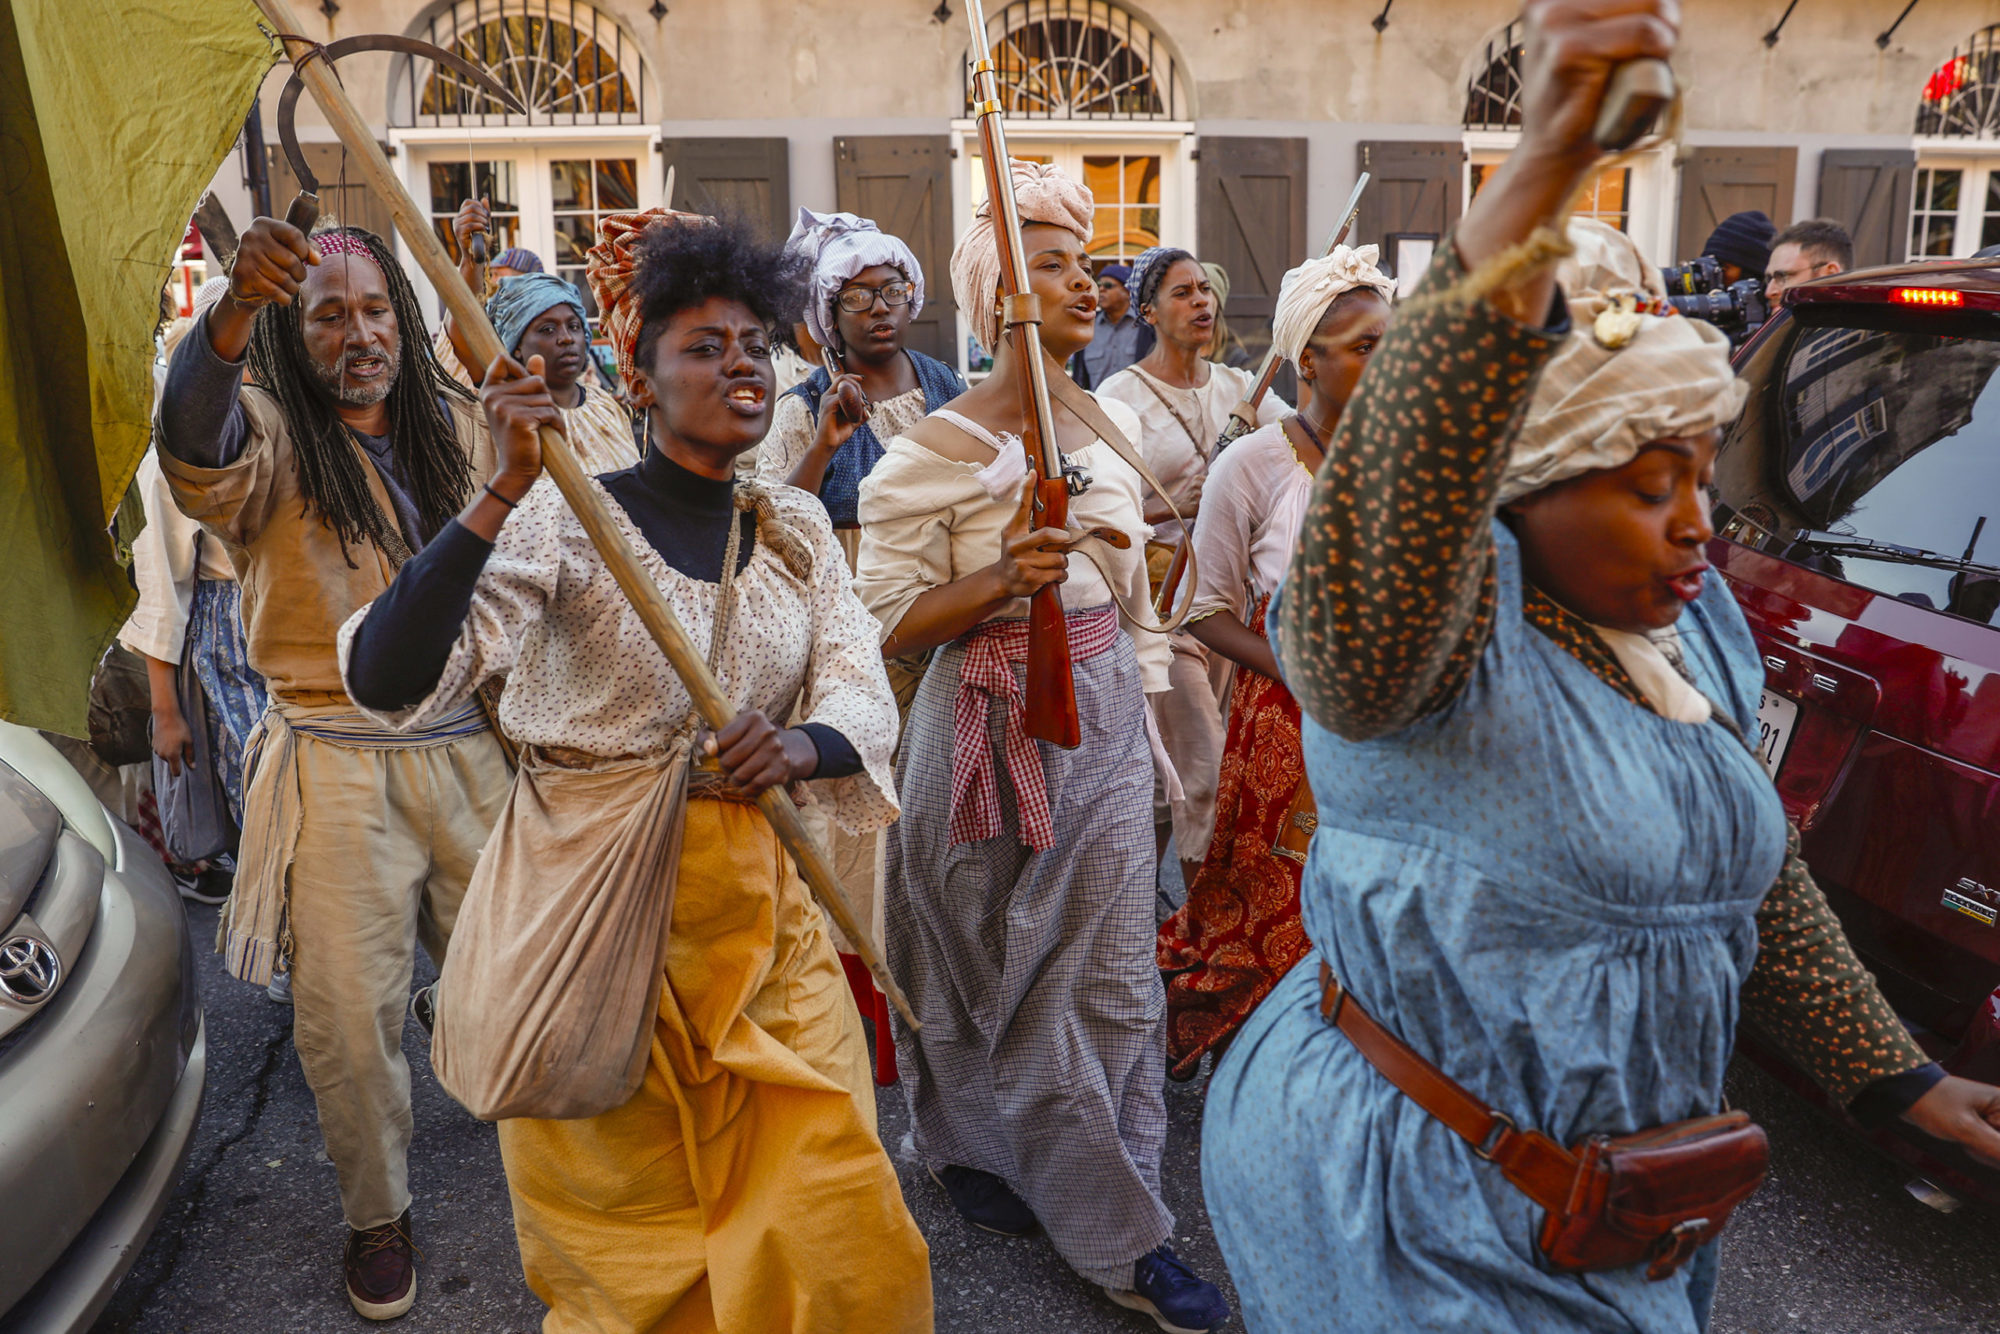 Black men and women in historical dress march through the streets of New Orleans in a slave rebellion reenactment